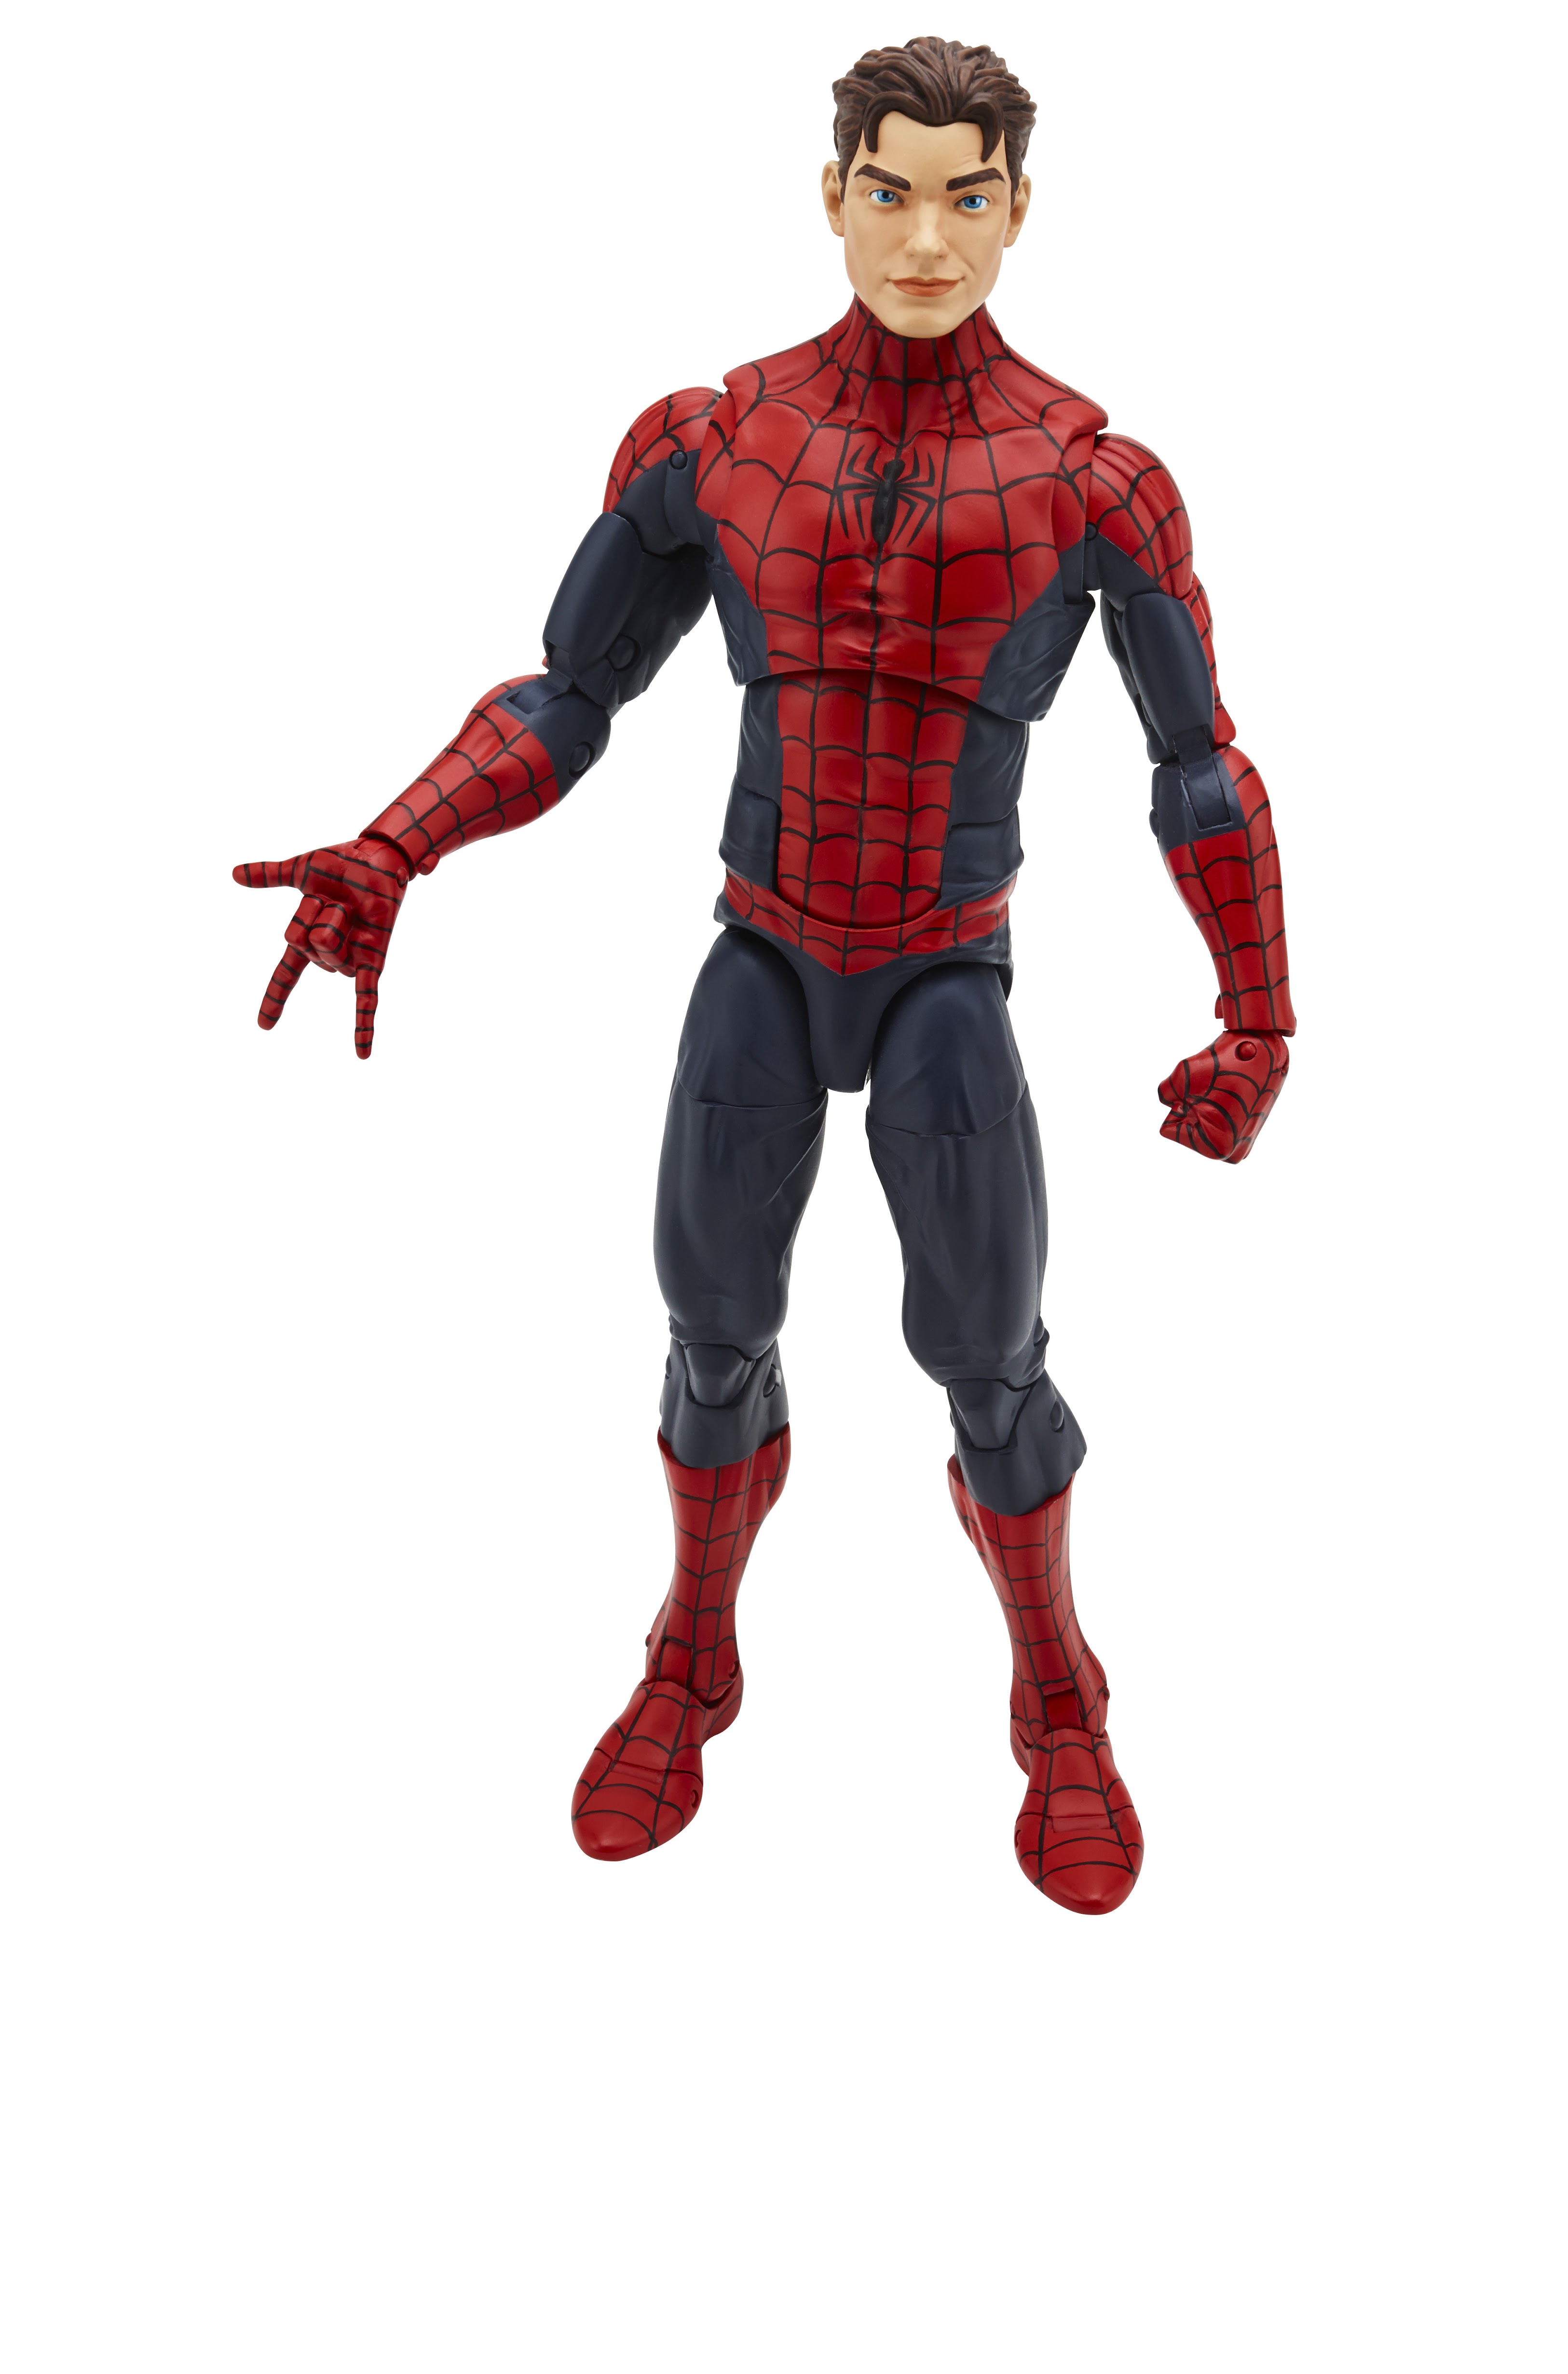 B7450AS00 Marvel Legends 12 Inch SpiderMan no mask Large 300DPI Large Batch of Hasbro Marvel & Star Wars Figure Images From Toy Fair